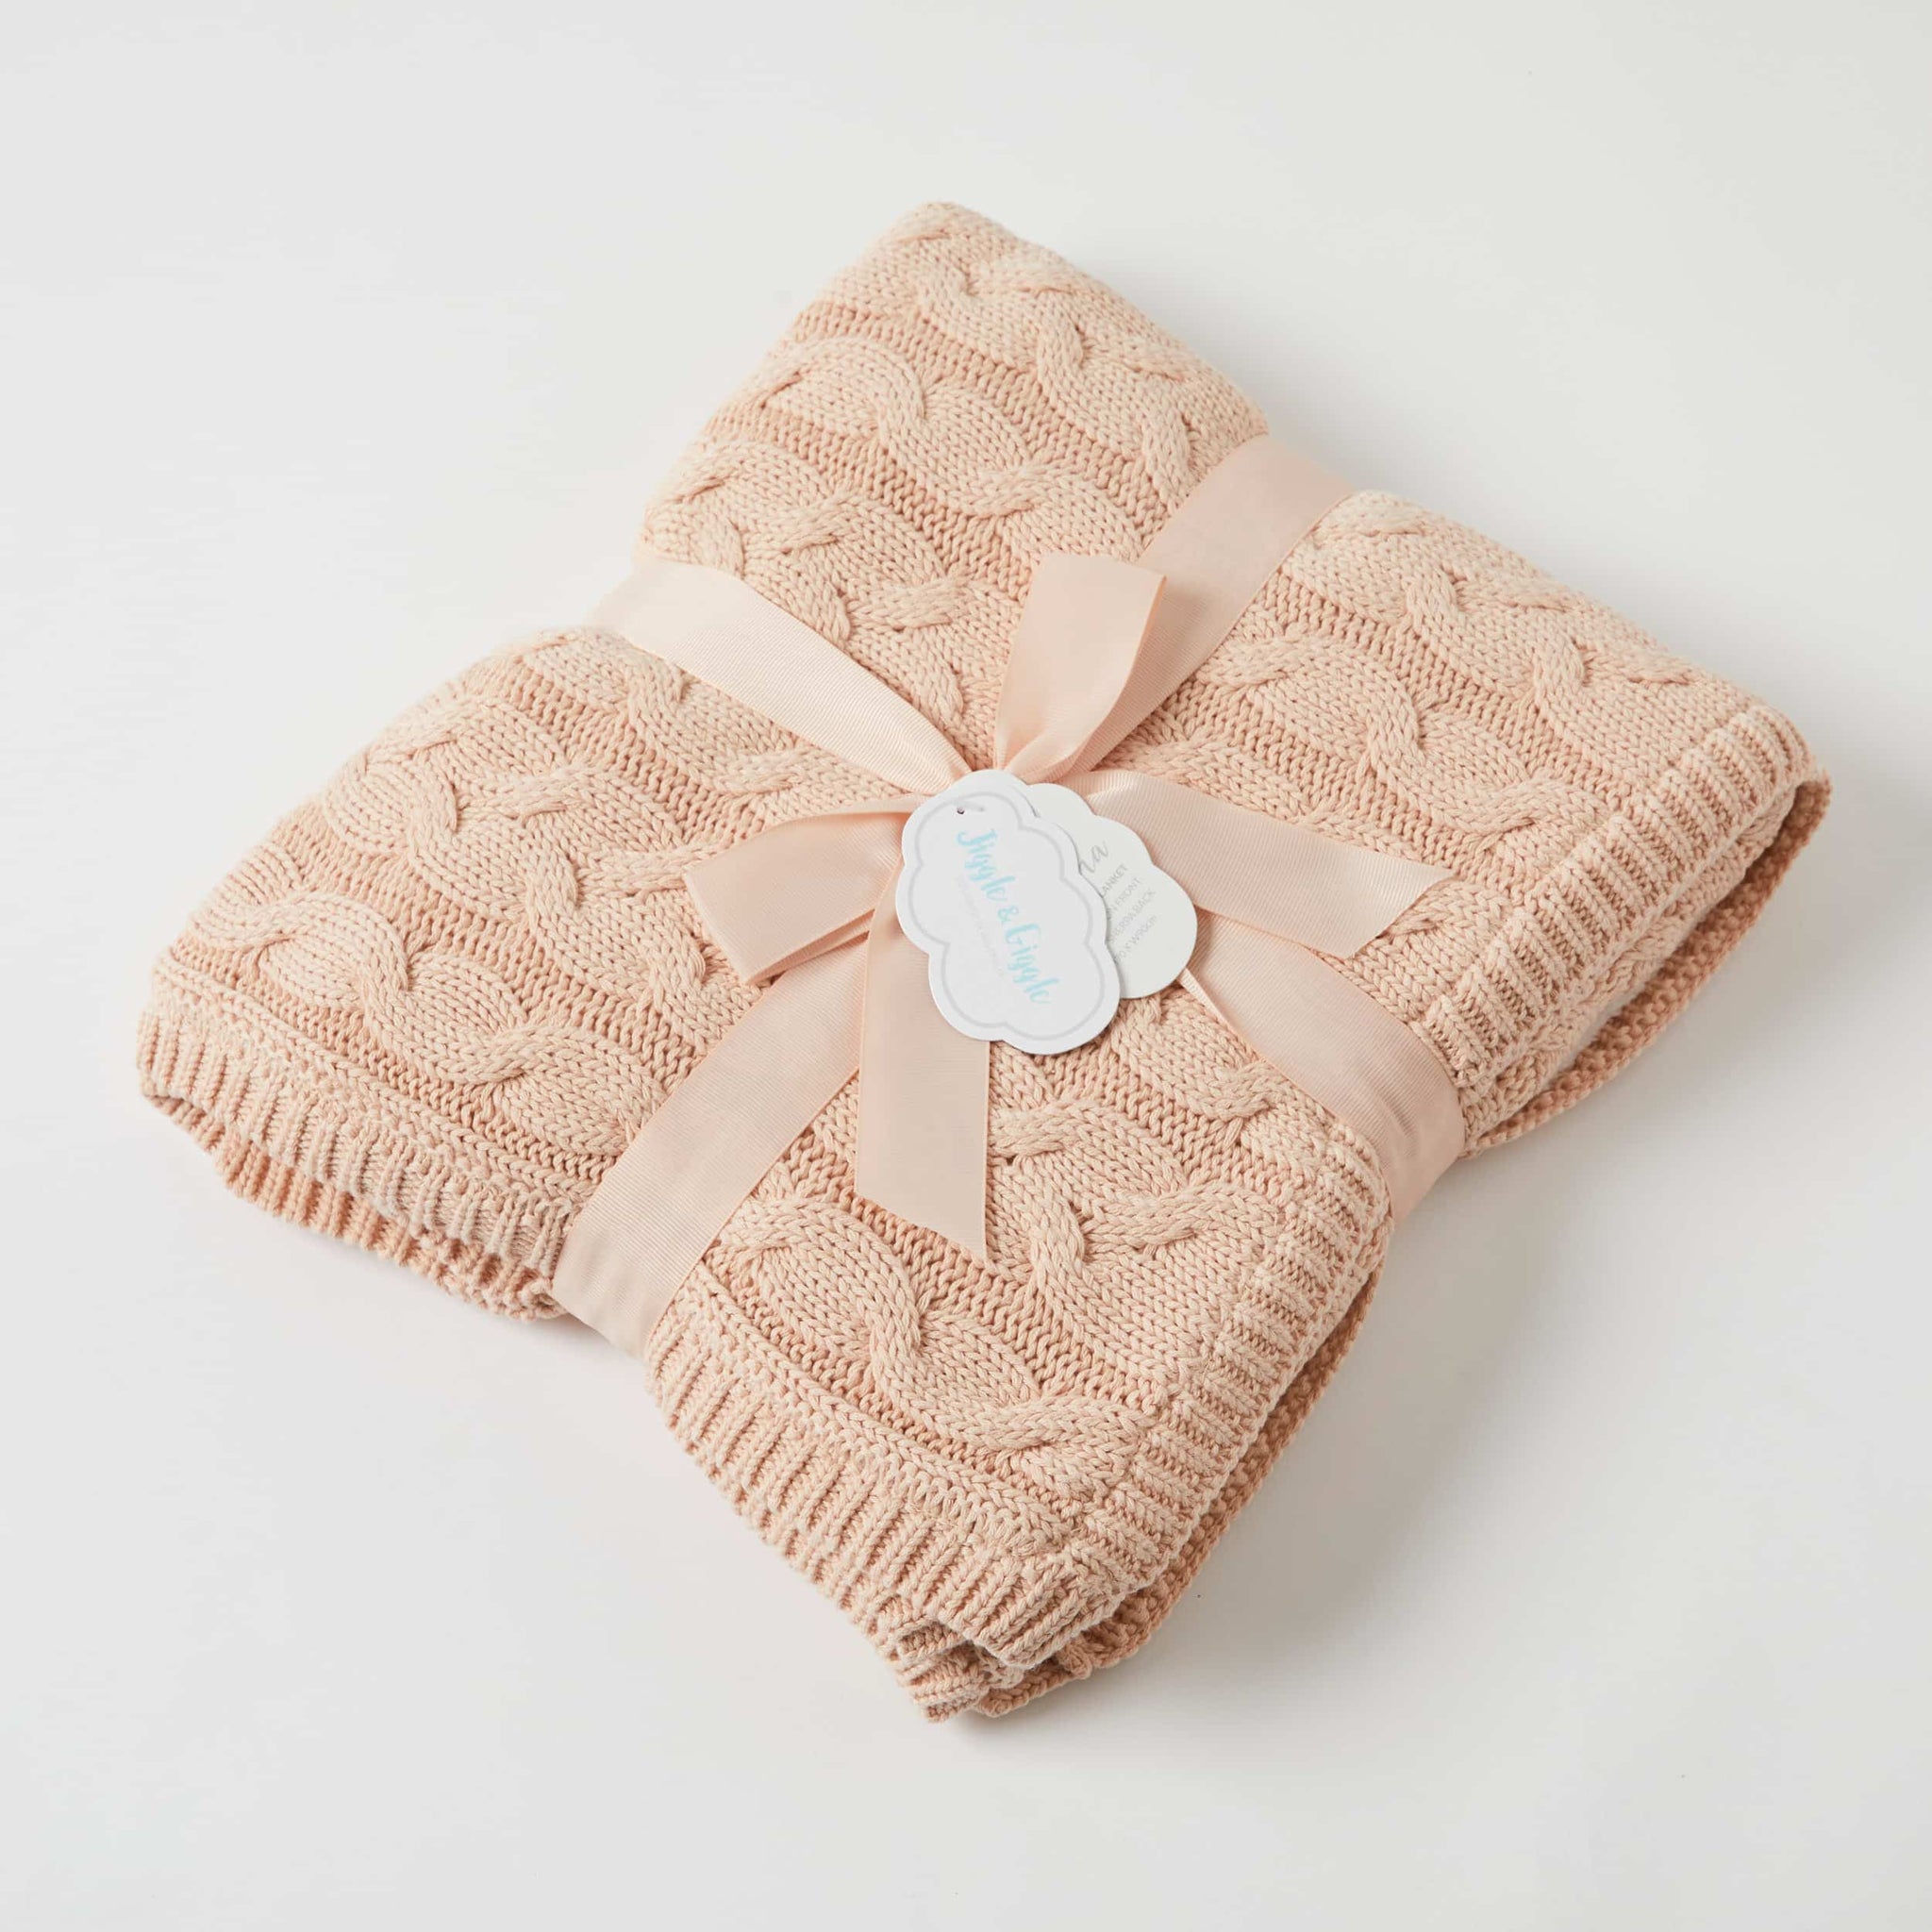 AURORA CABLE KNIT BABY BLANKET - PINK CLAY